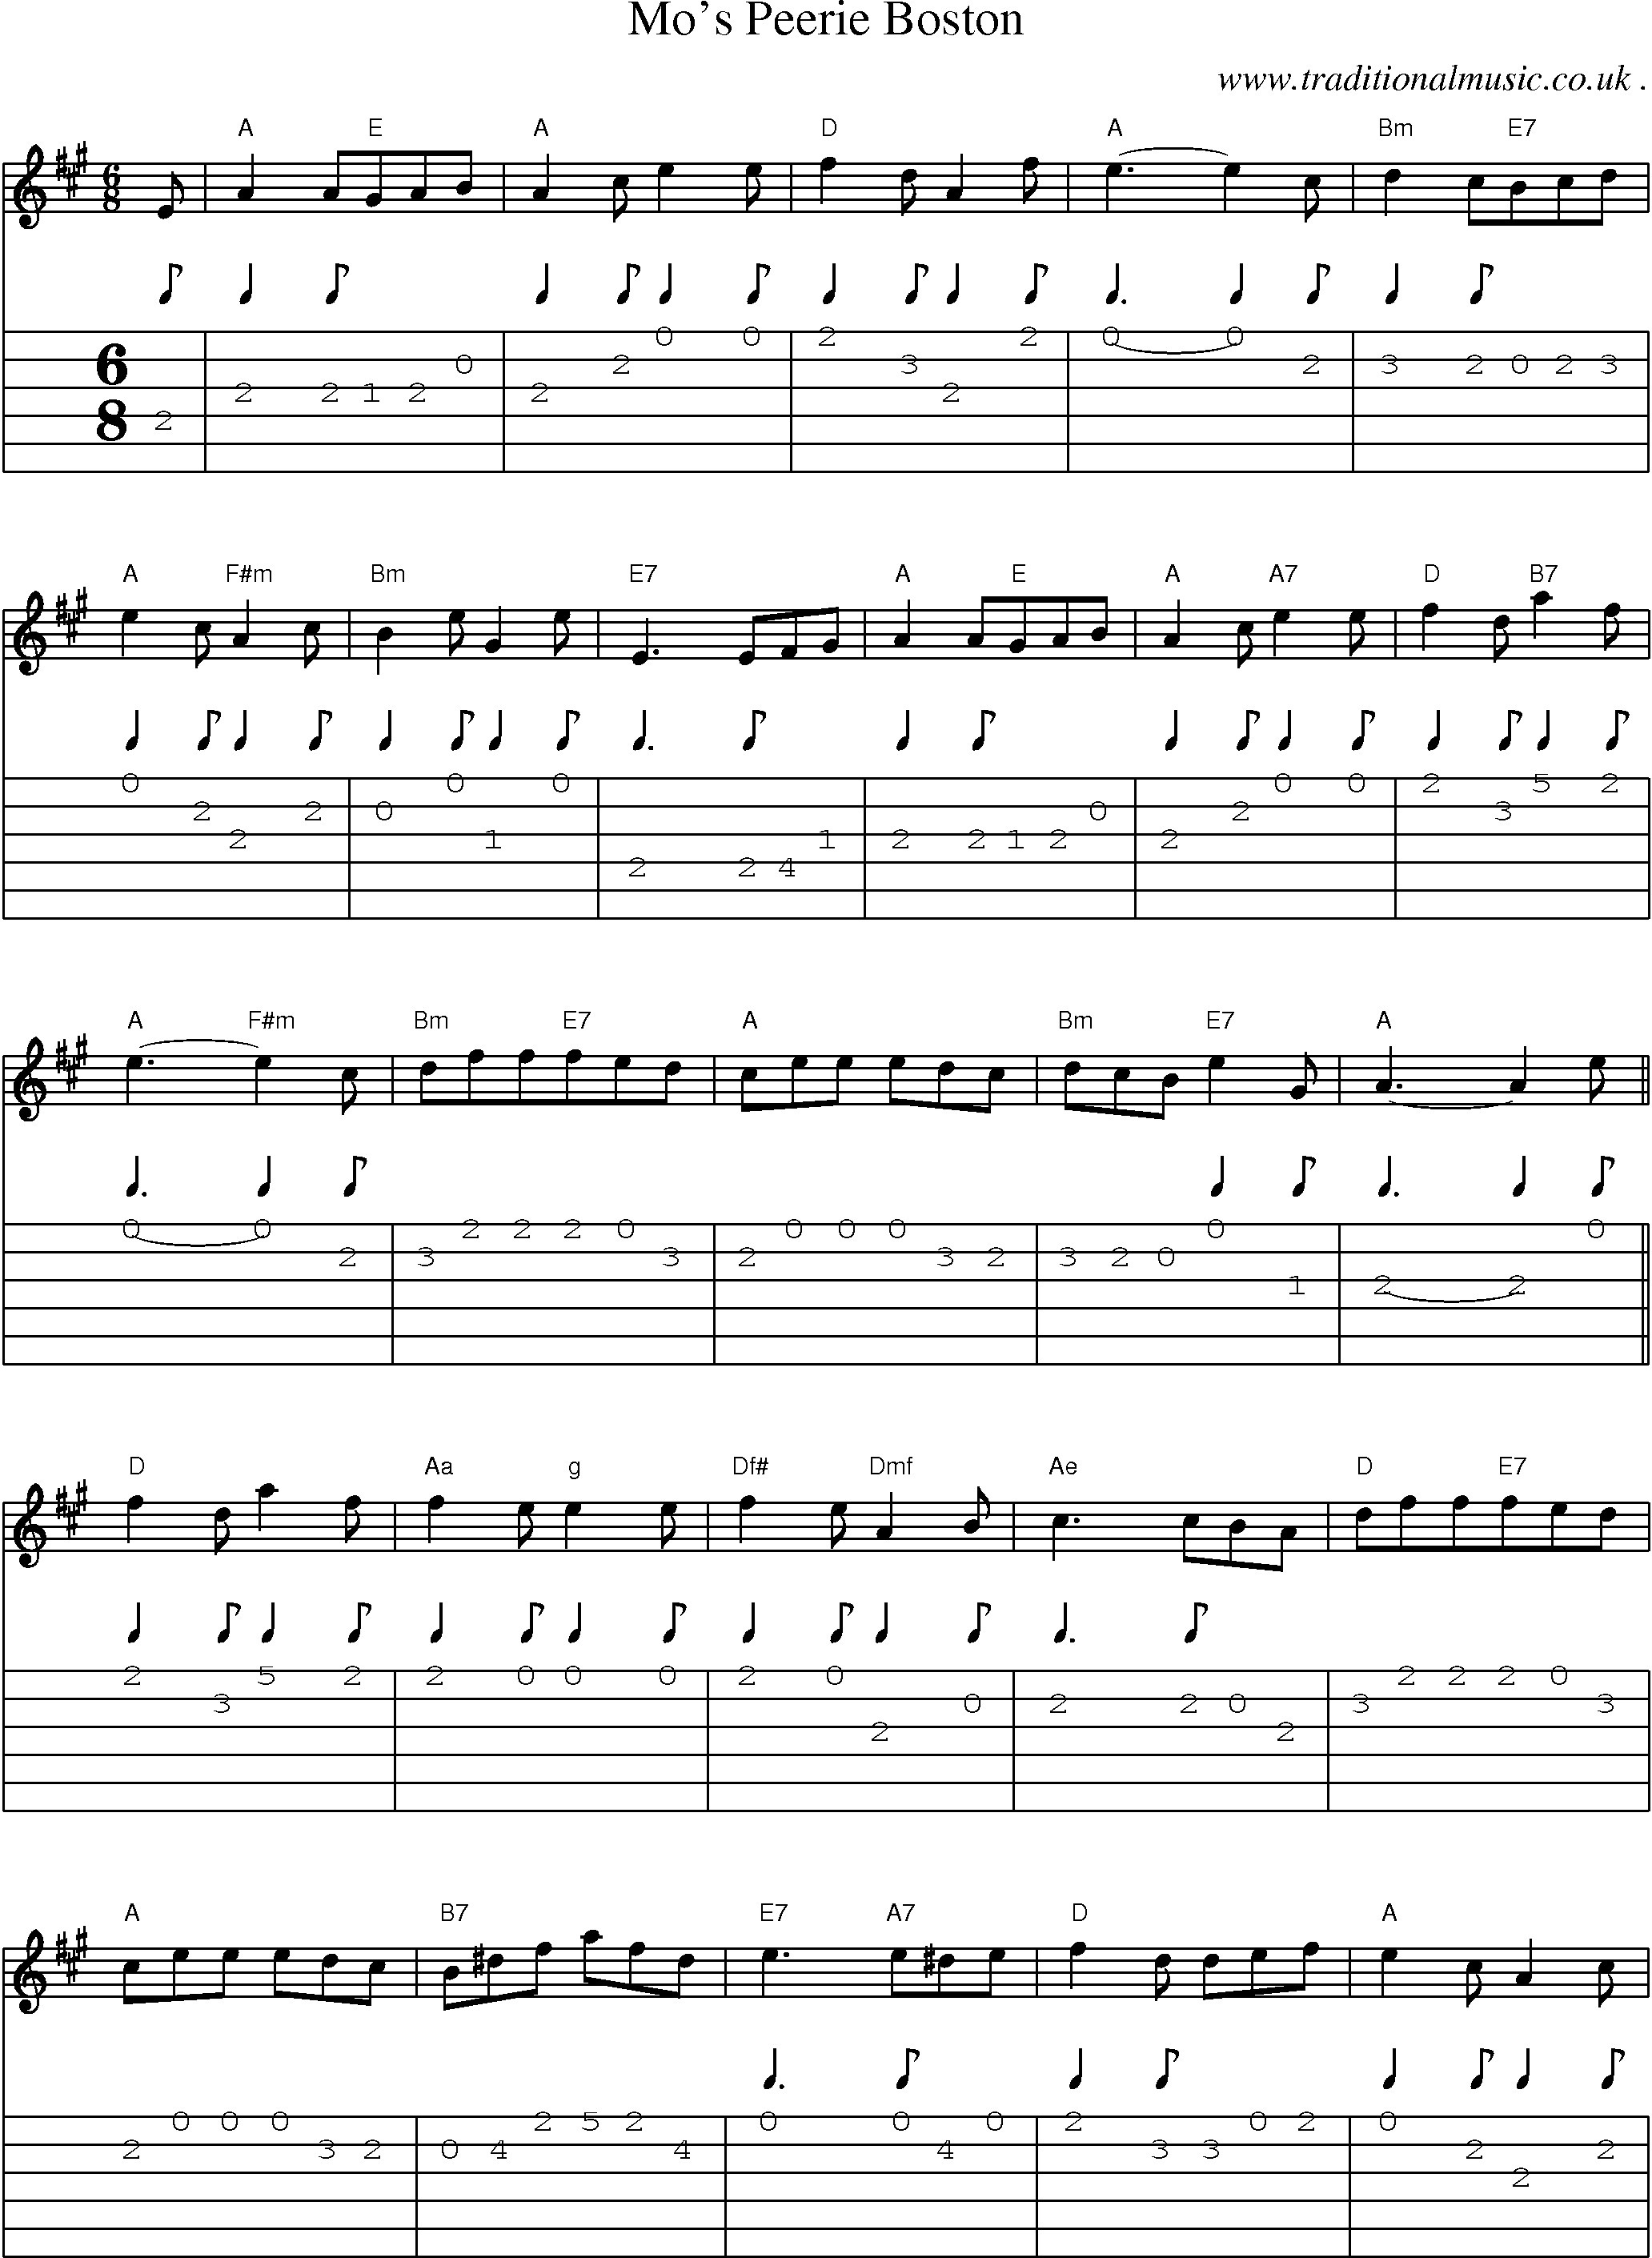 Sheet-Music and Guitar Tabs for Mos Peerie Boston